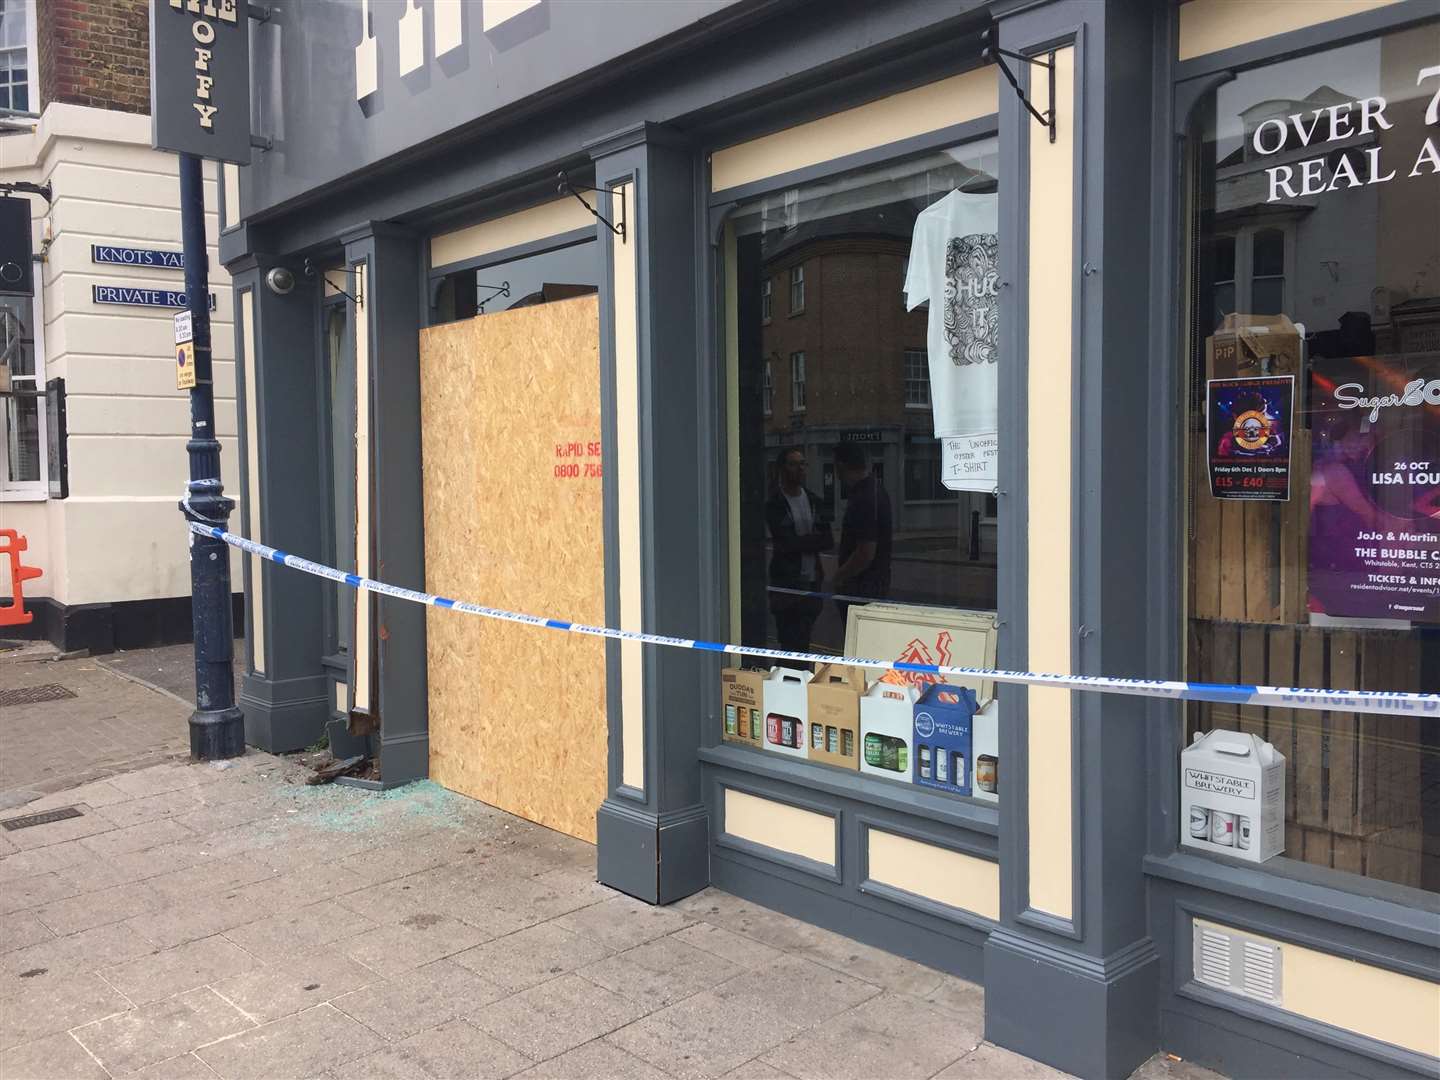 Police have taped off the off-licence (16705570)